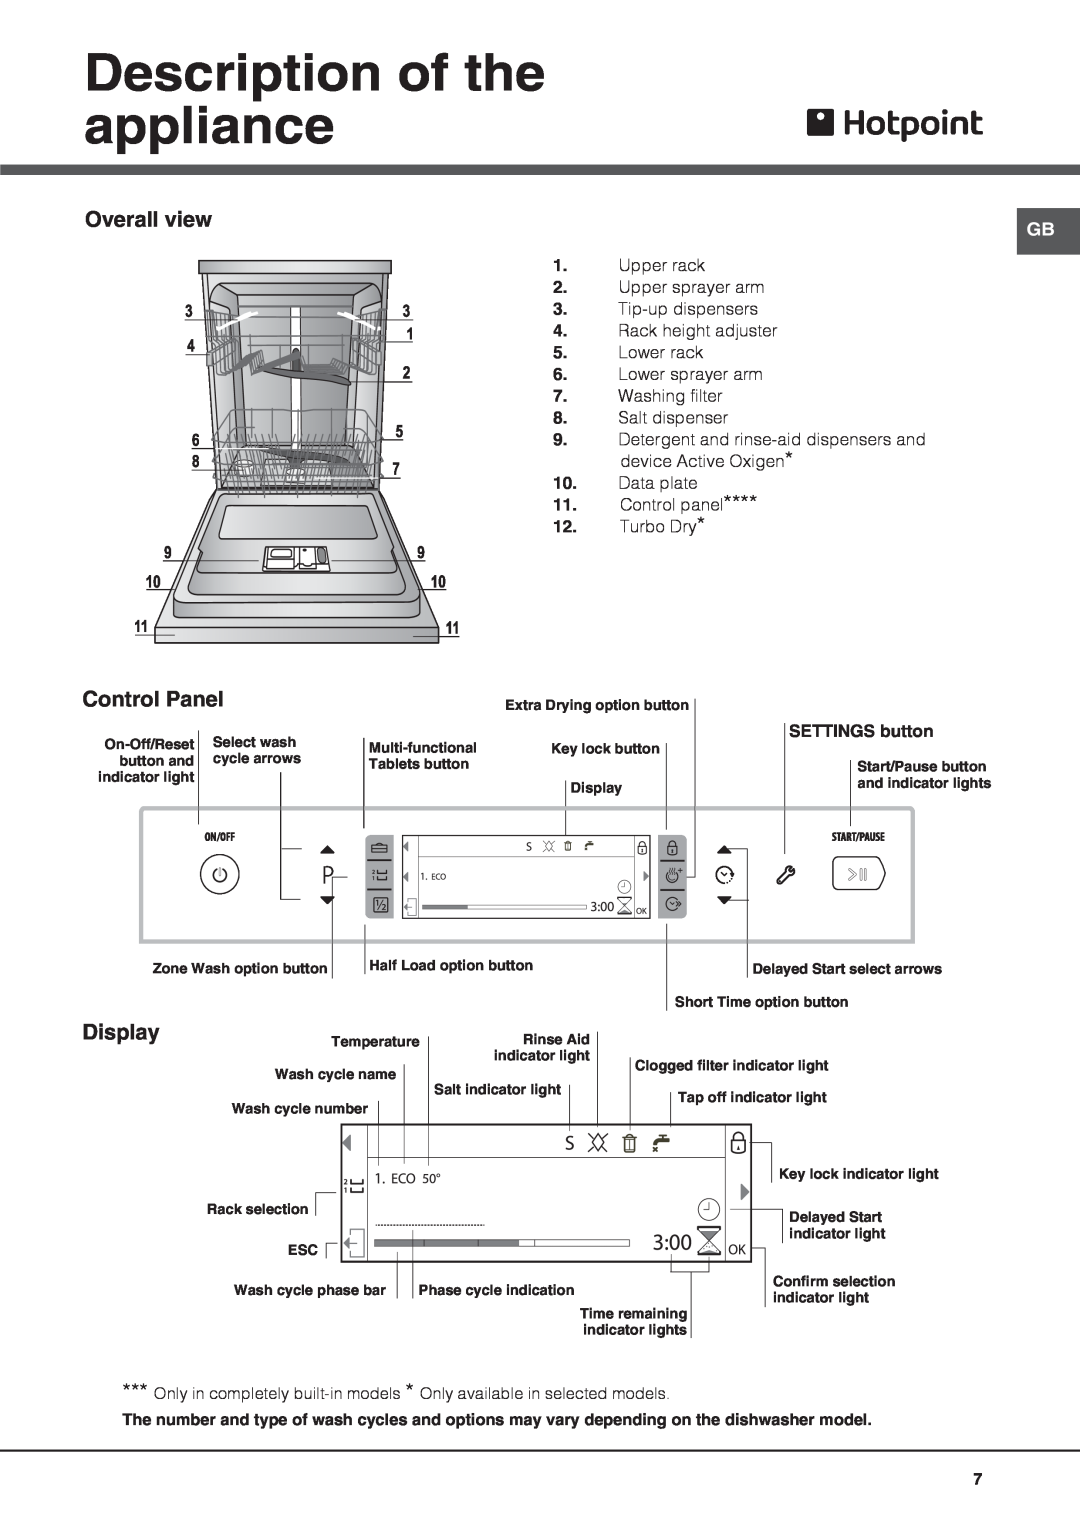 Hotpoint FDUD 44110 ULTIMA manual Description of the appliance, Overall view, Control Panel, Display, SETTINGS button 